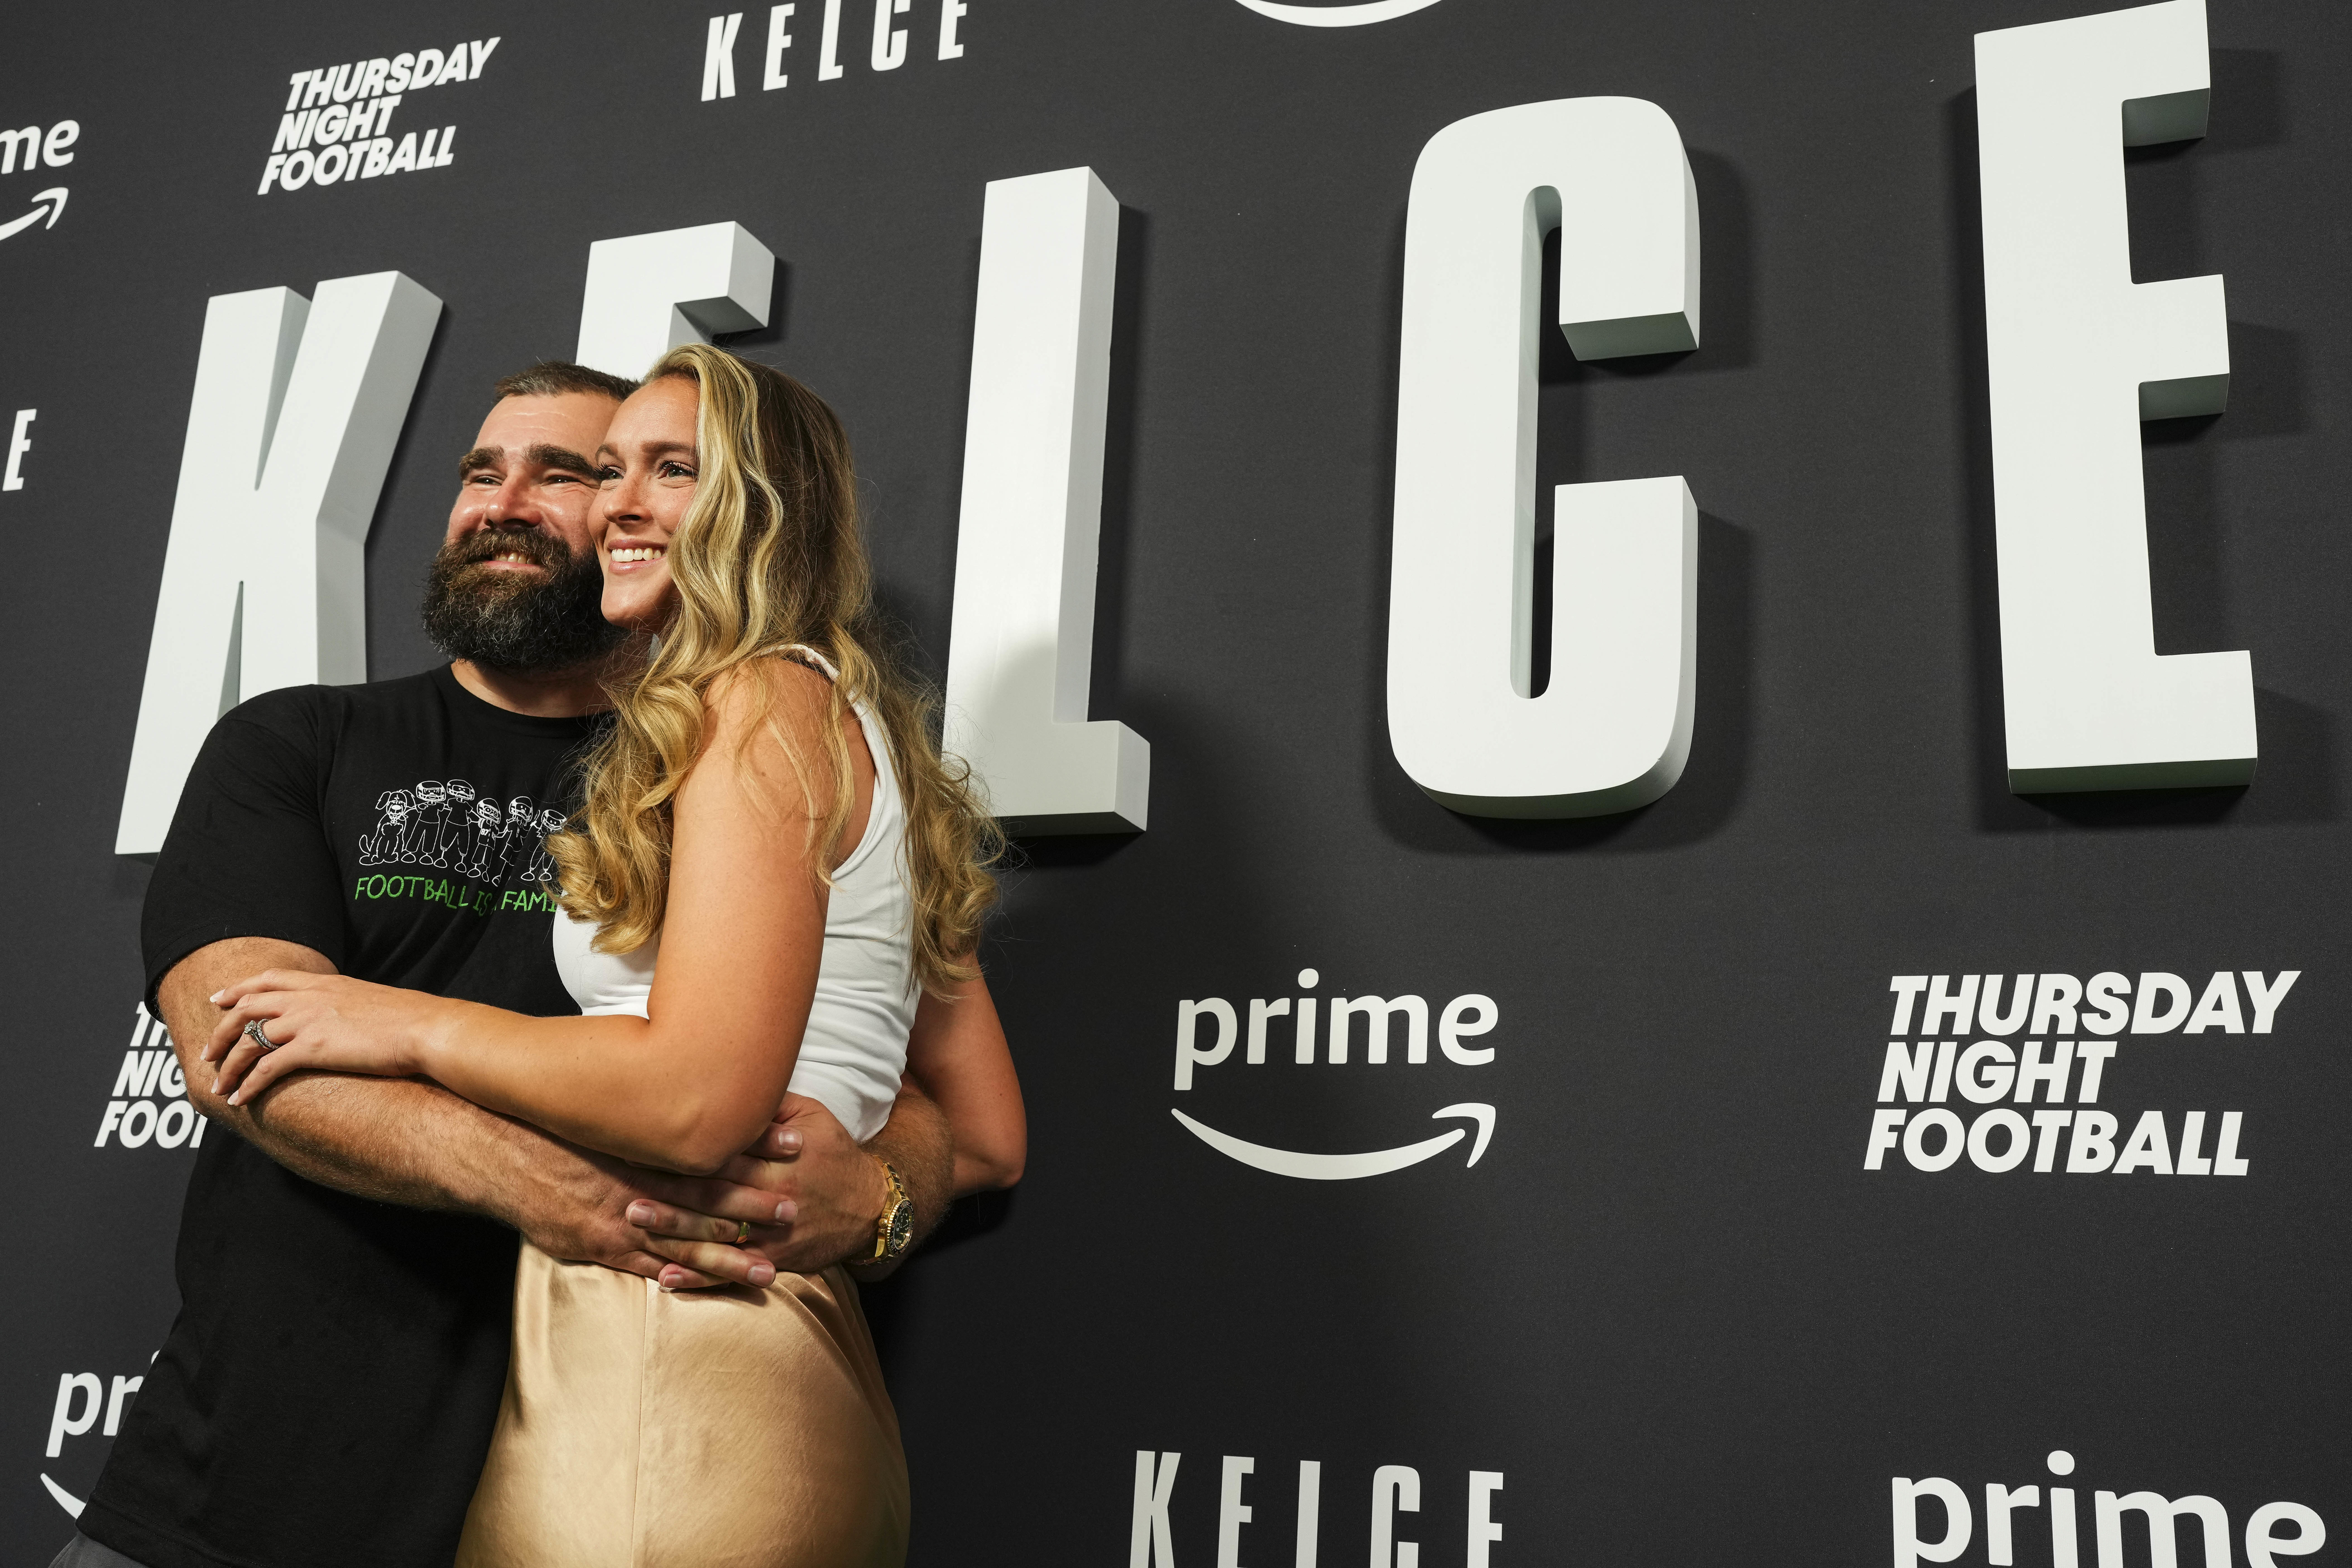 Jason and Kylie Kelce embracing and smiling at a Thursday Night Football event